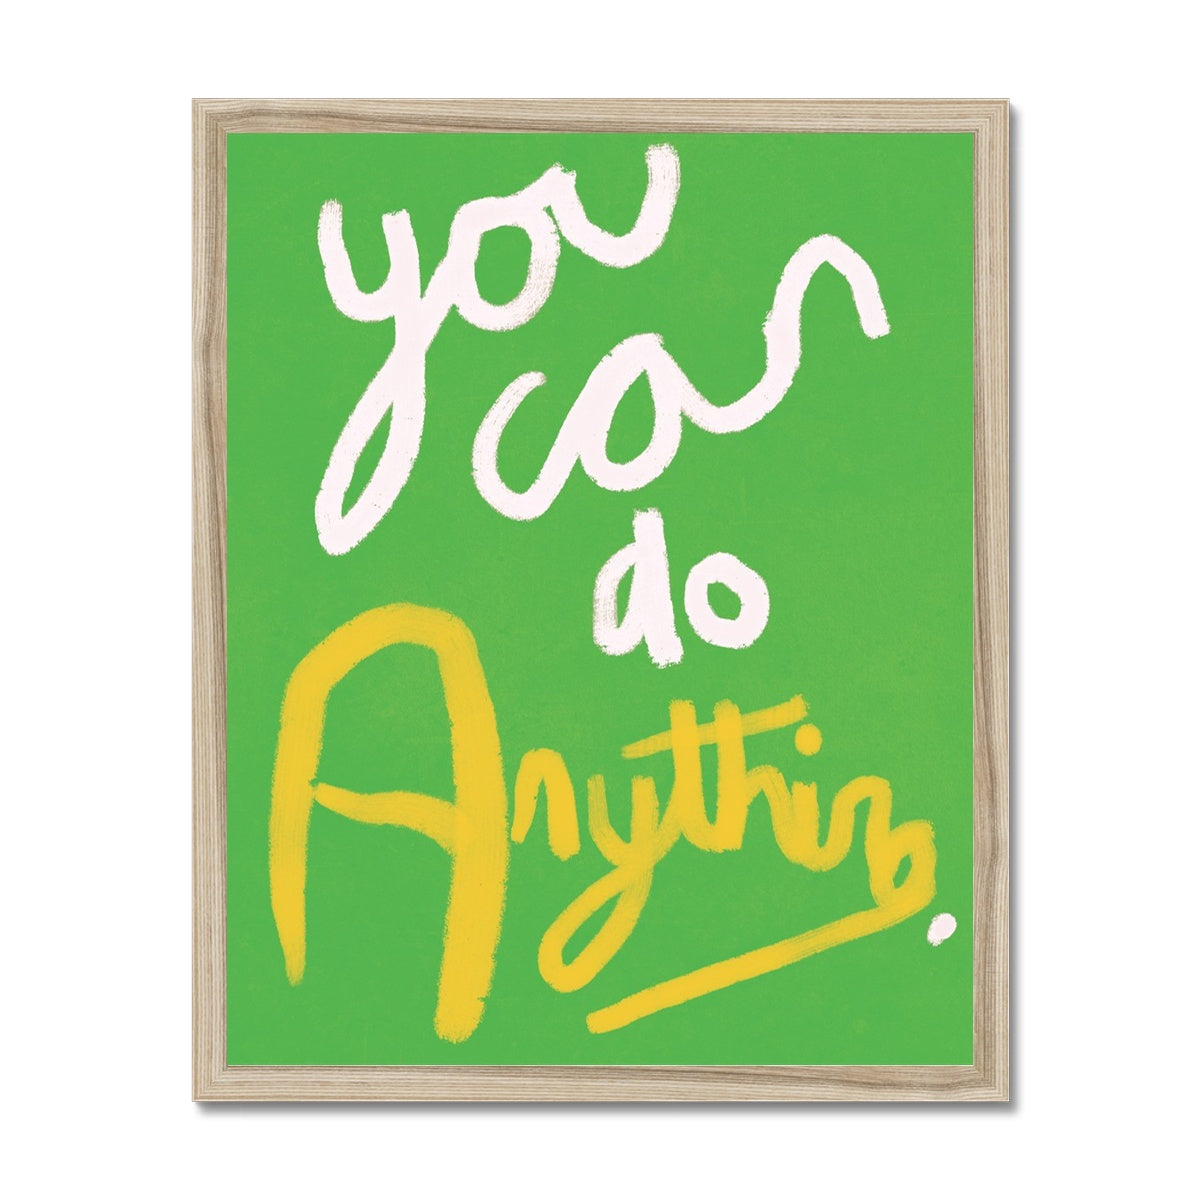 You Can Do Anything Print - Green, White, Yellow Framed Print